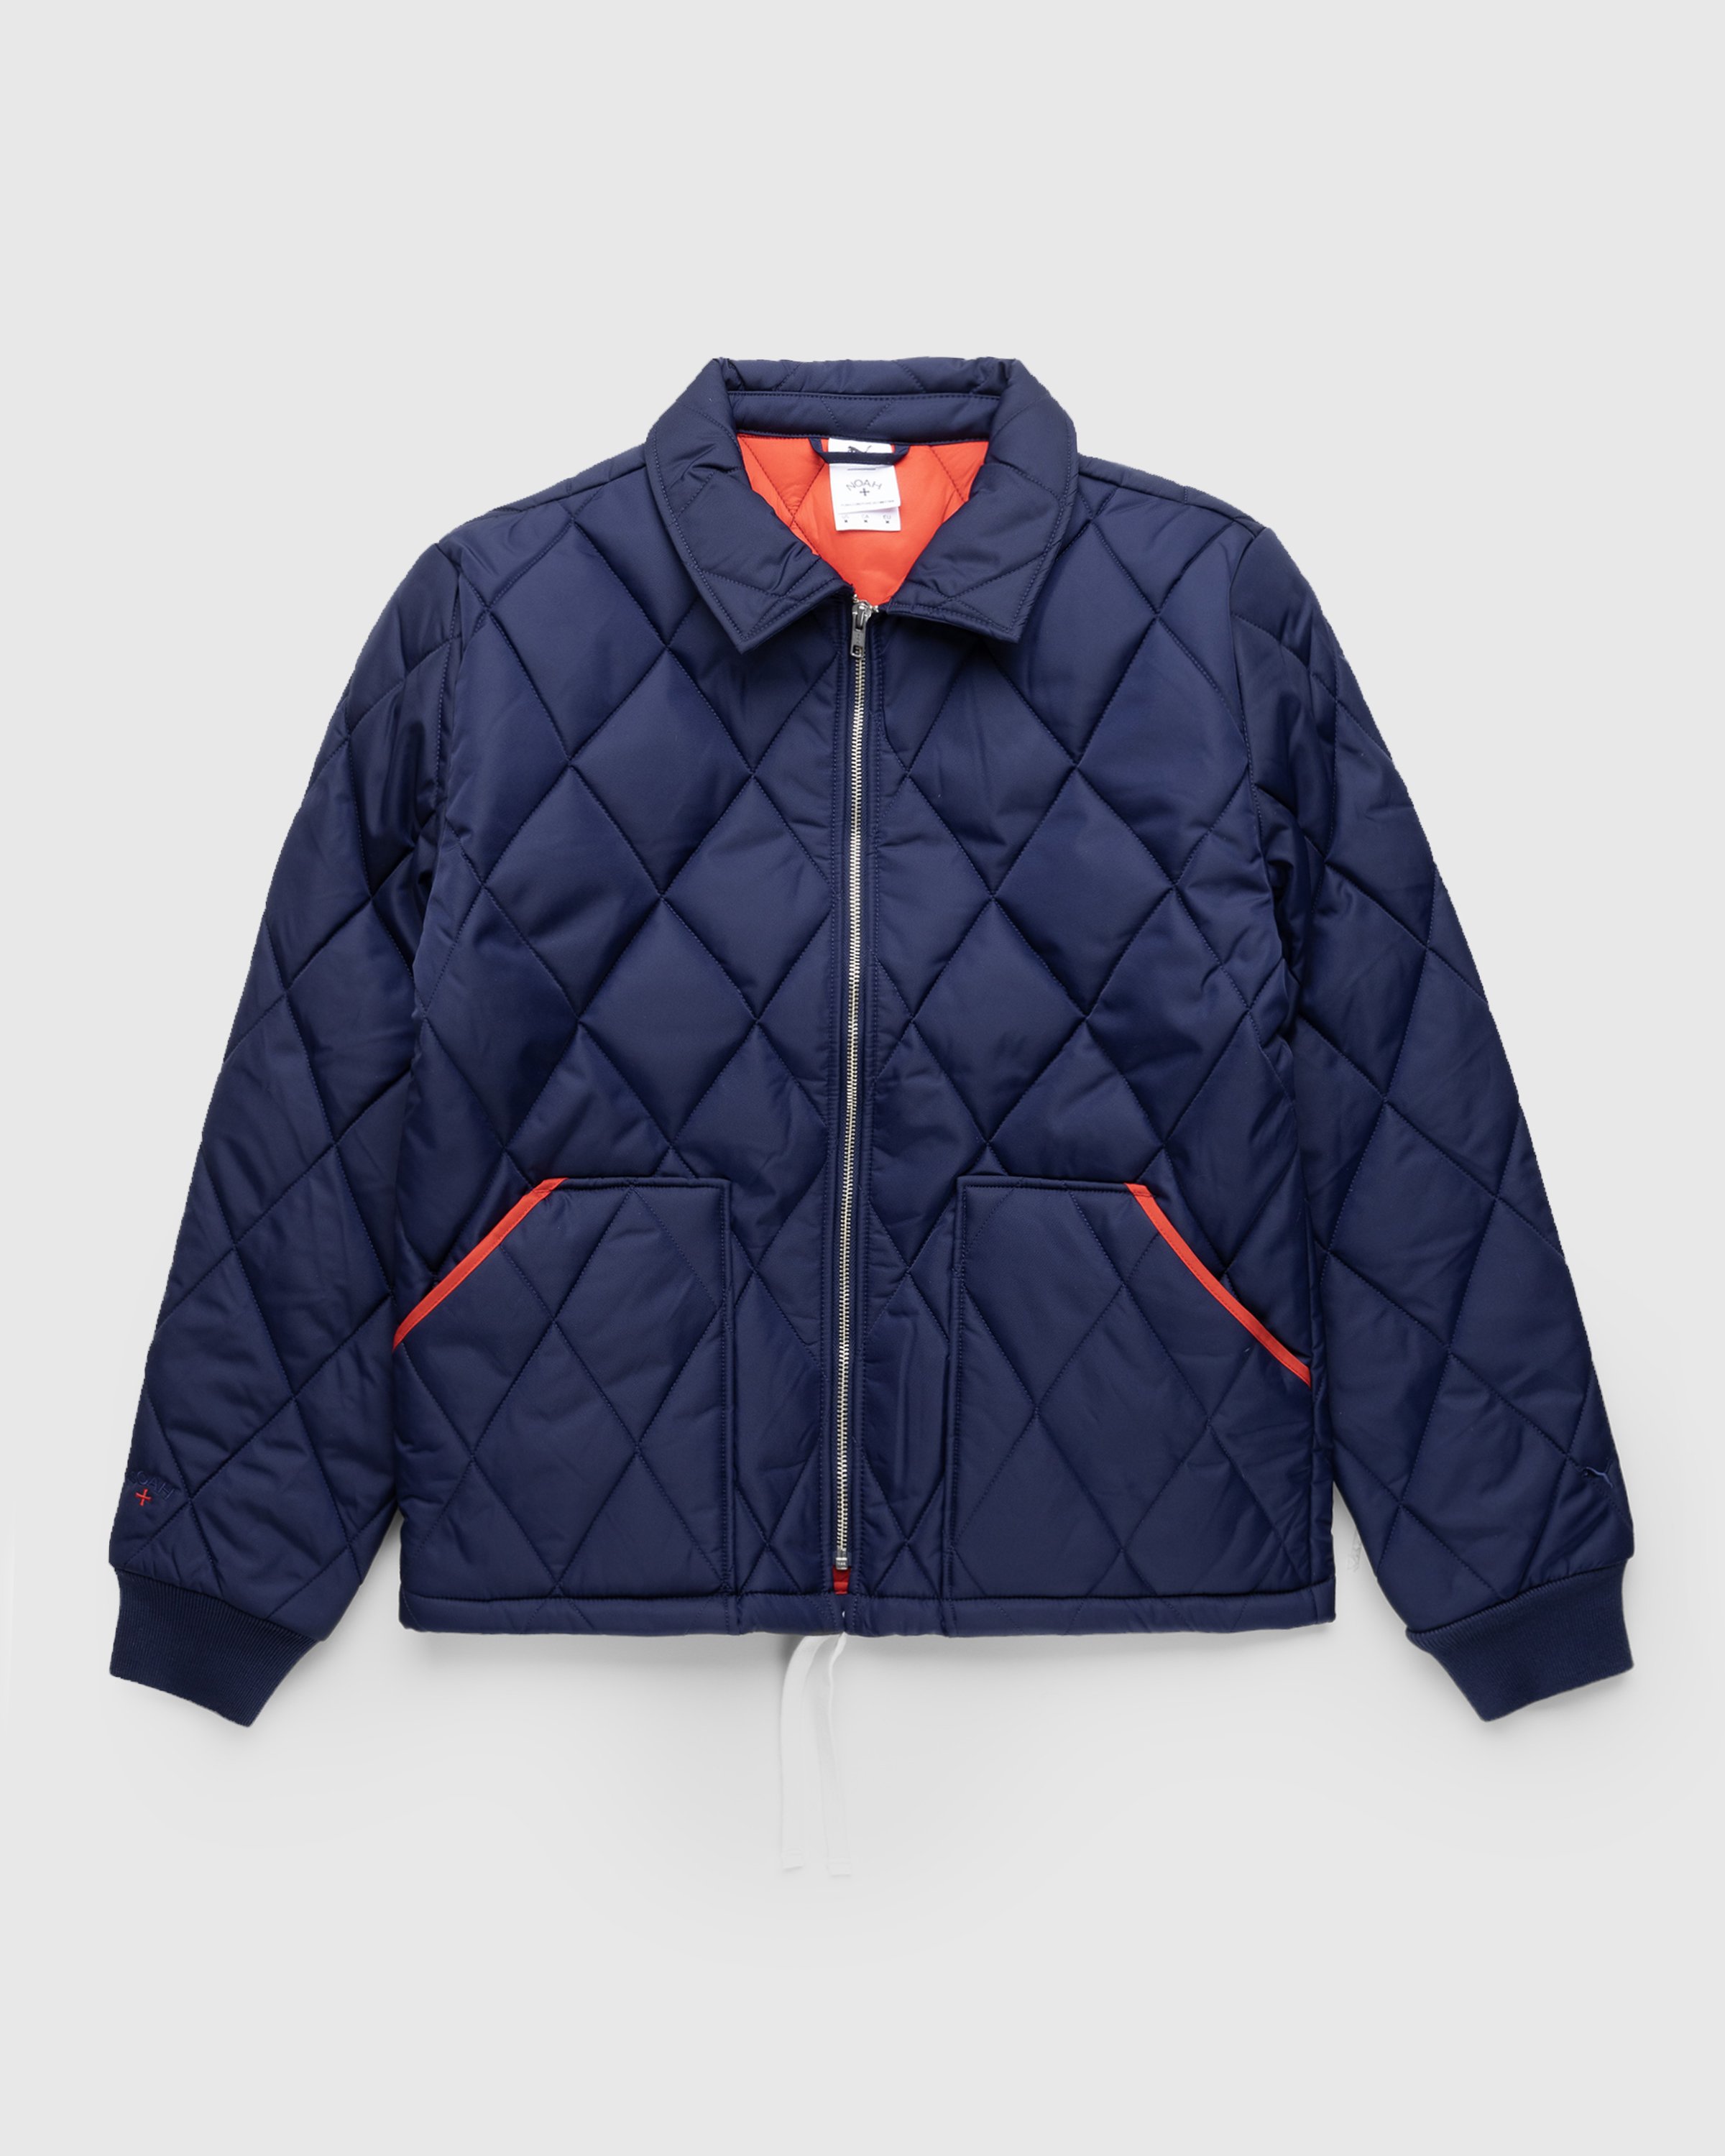 Puma x Noah - Water-Repellent Quilted Jacket Navy - Clothing - Blue - Image 1